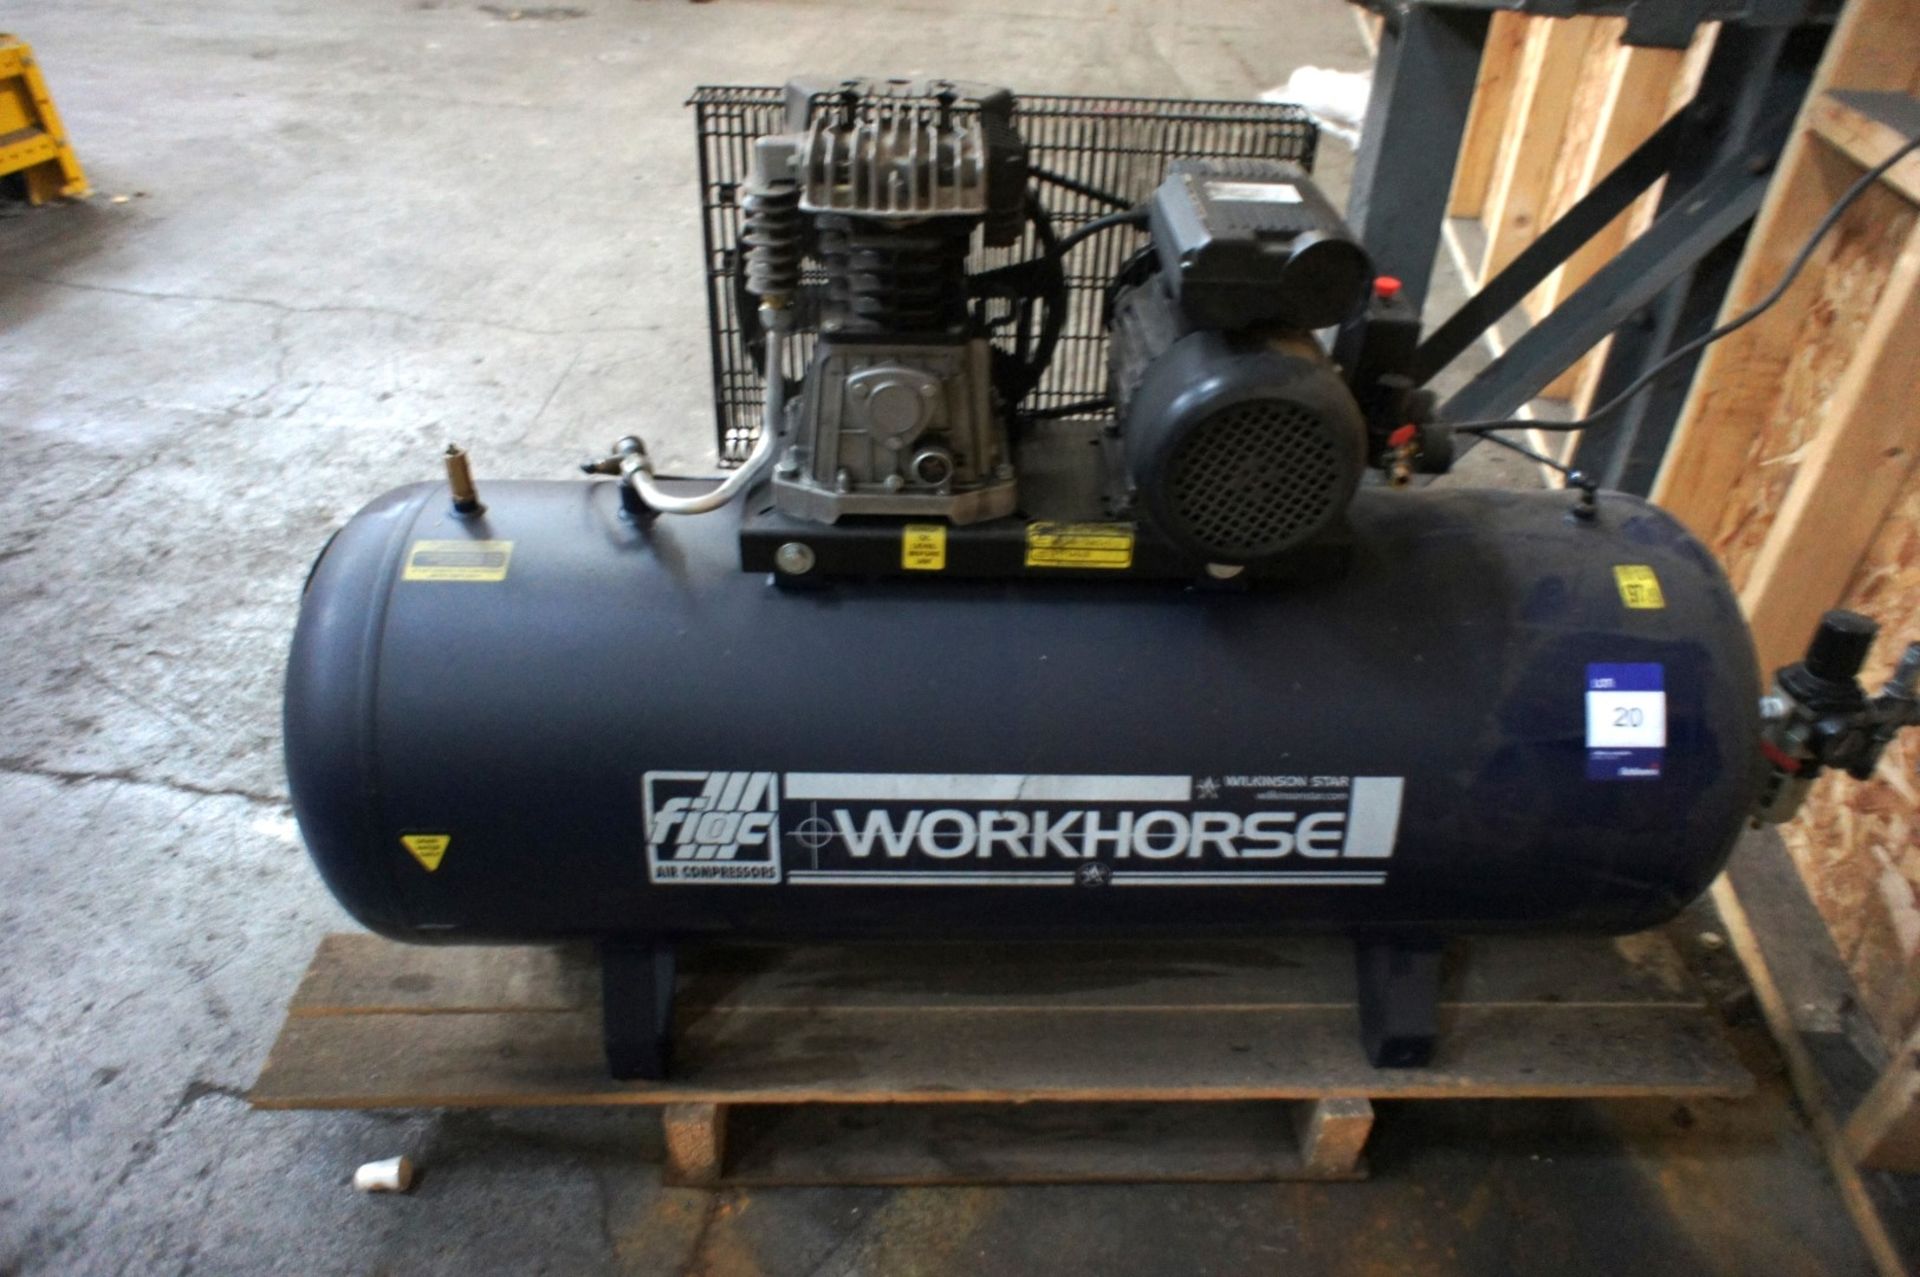 * Wilkinson Star Fiac MEC90 2.2kW 240V Air Compressor. Please note there is a £5 plus VAT Lift Out